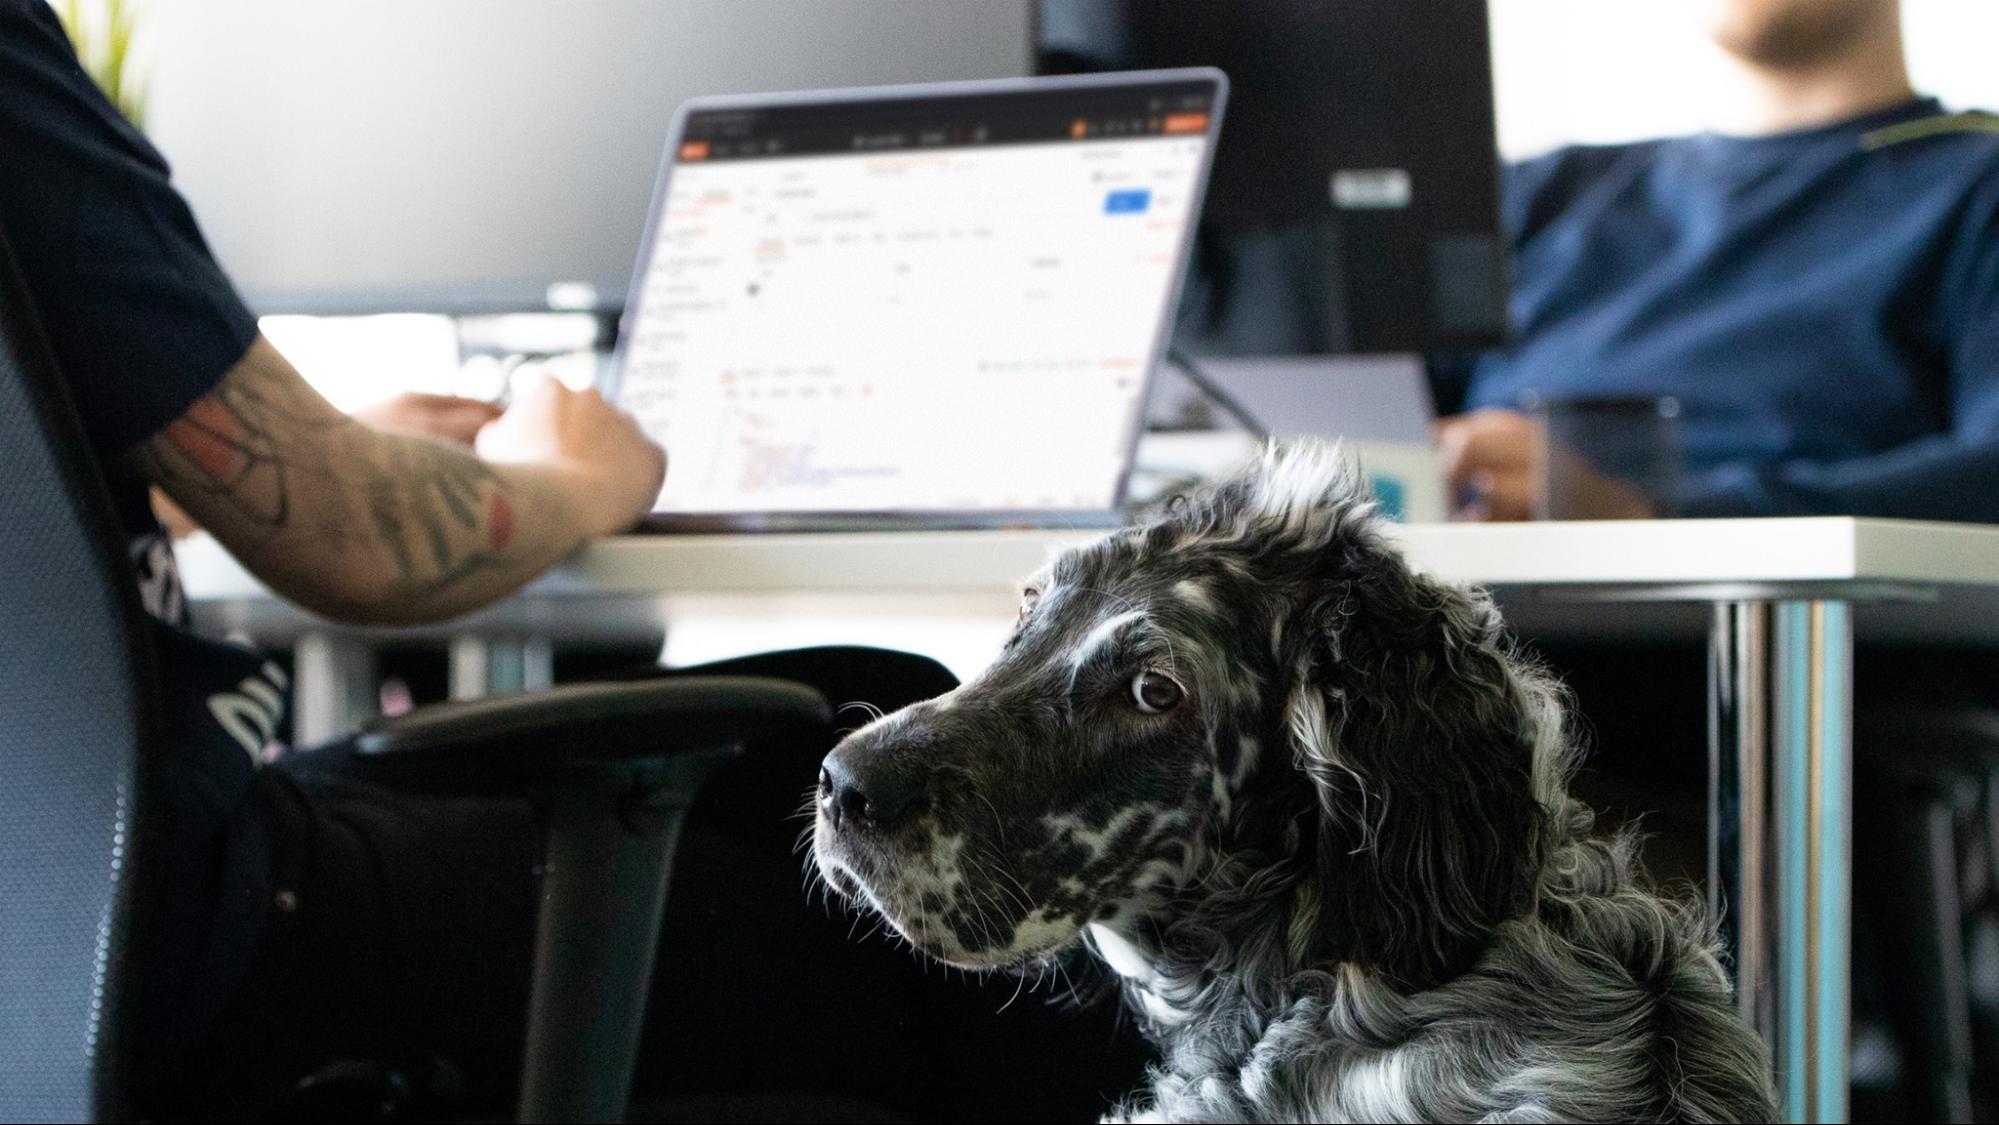 Dog pictured in office